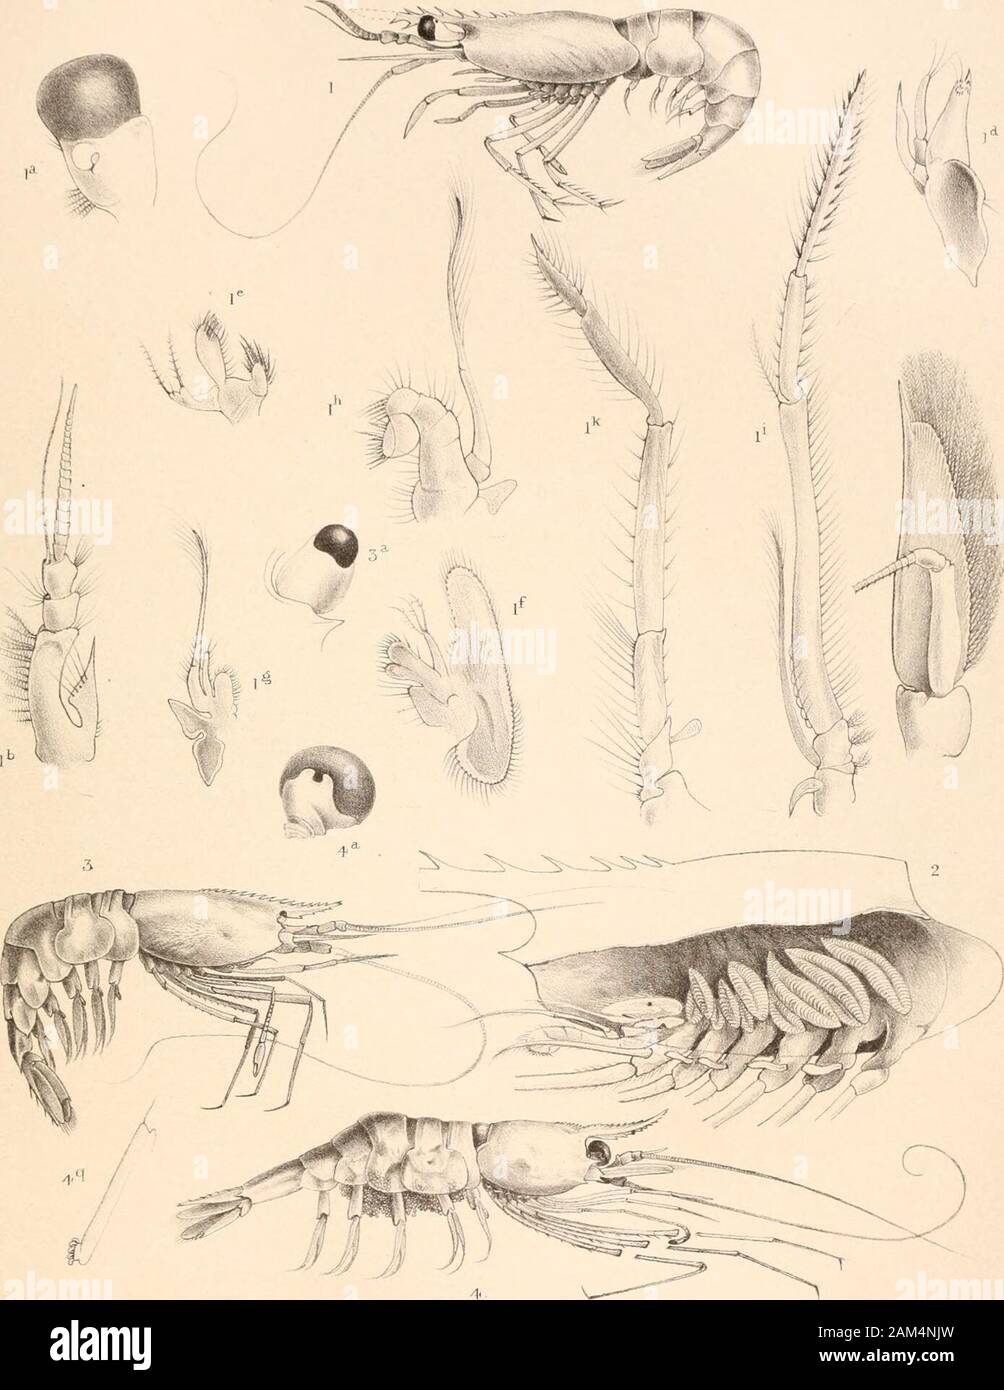 Report on the scientific results of the voyage of H.M.SChallenger during the years 1873-76 : under the command of Captain George SNares, R.N., F.R.Sand Captain Frank Turle Thomson, R.N. . I.PANDALUS MACNOCULUS 2. » FALCIPES 3. PANDALOPSIS AMPLUS i ? PLATE CXYI. PLATE CXVI. Chlorotocus incertus (p. 674).Fig. 1. Lateral view ; enlarged twice.„ la. Ophthalmopod.„ lb. First antenna.,, c. Second antenna.„ id. Mandible.„ le. First siagnopod.„ If. Second siagnopod.,, Ig. Third siagnopod.„ lh. First gnathopod.„ It. Second gnathopod.„ Ik. First pereiopod.„ 2. Pereion, showing branchial arrangement. Do Stock Photo